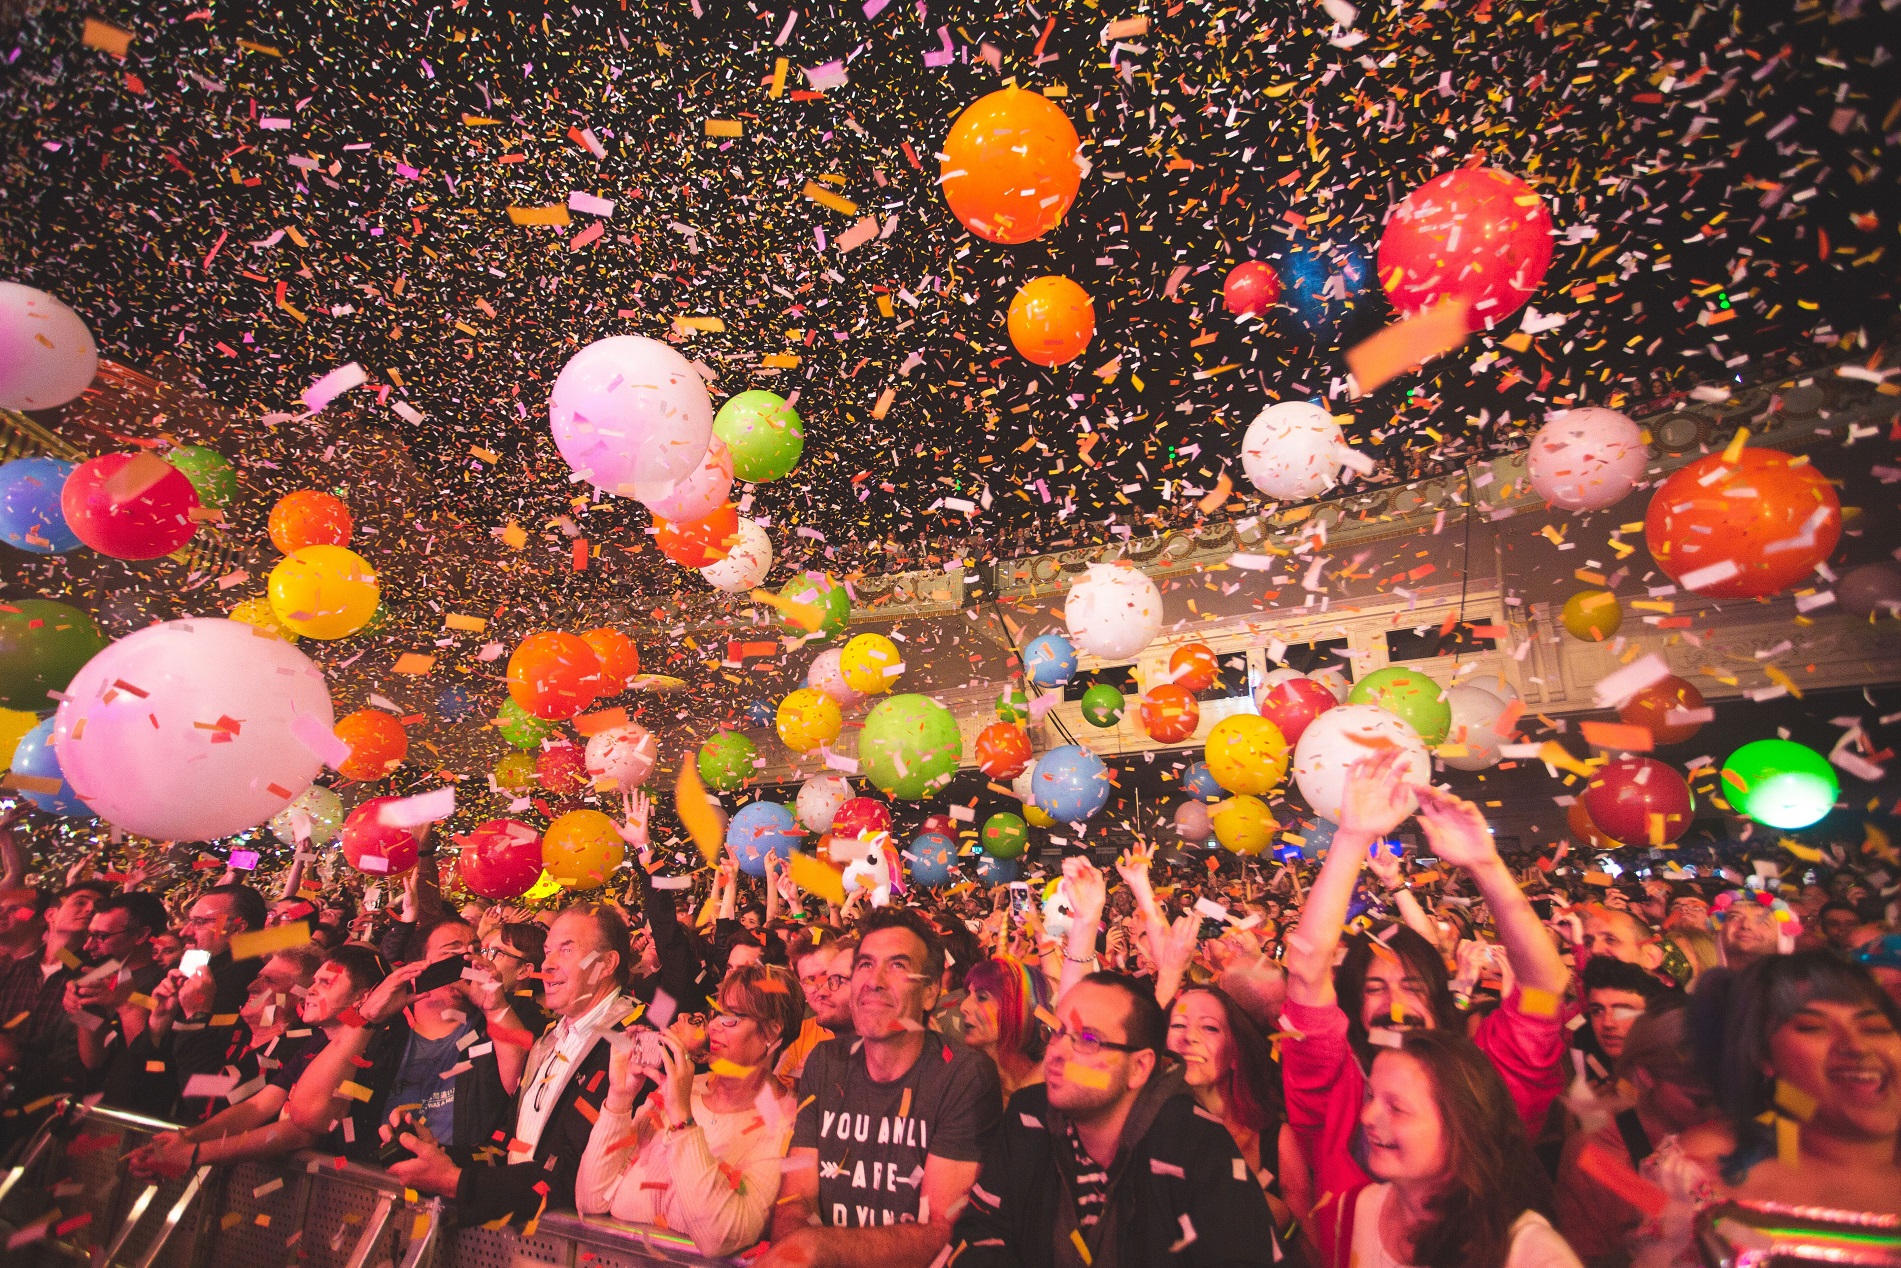 The Flaming Lips' crowd at Brixton Academy